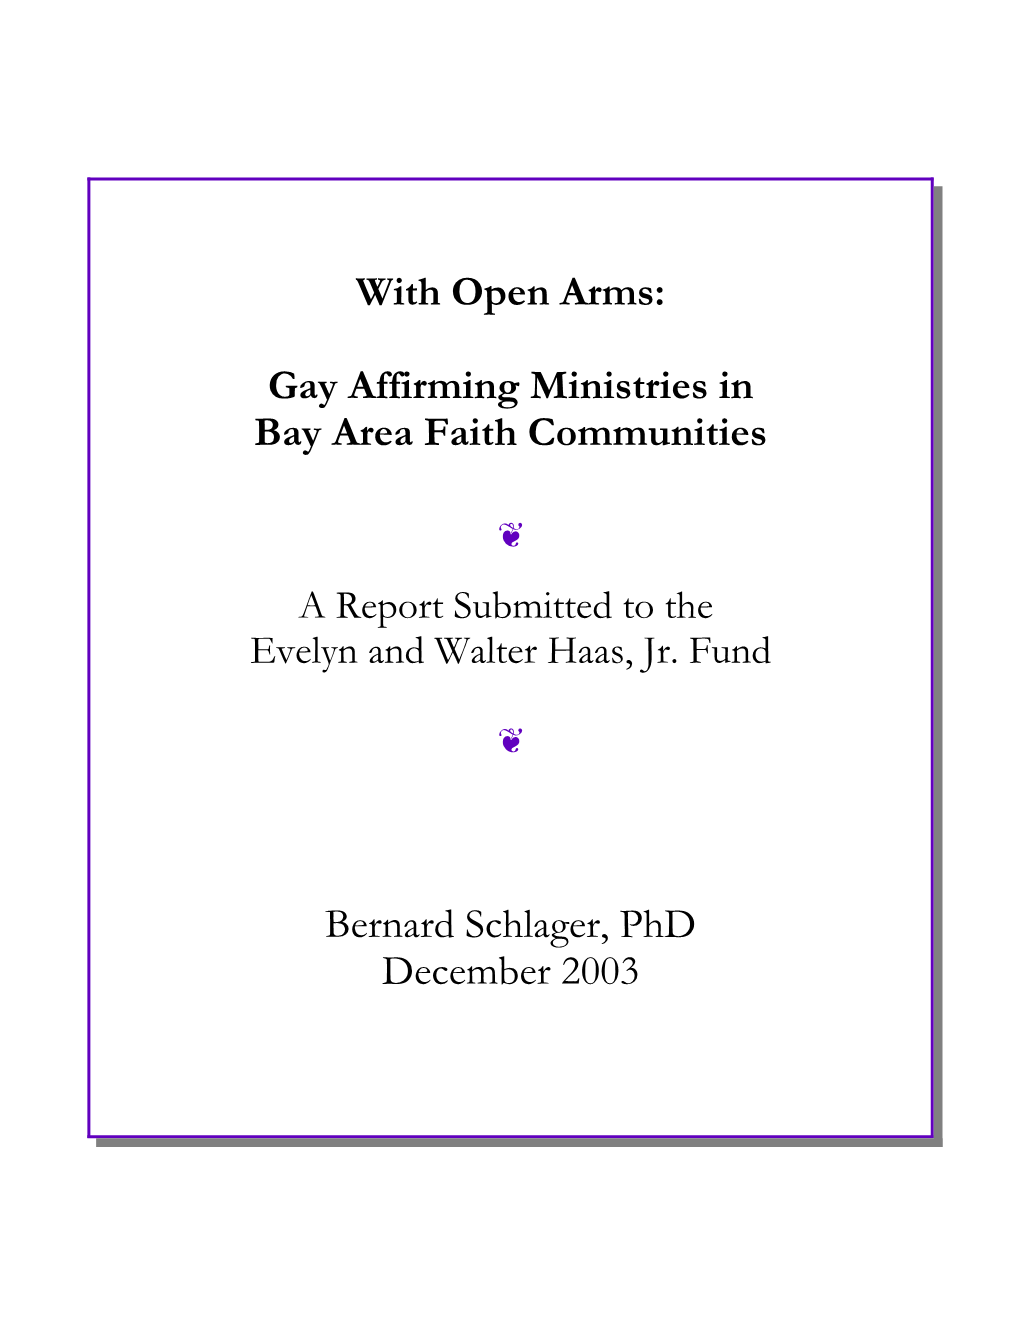 Gay Affirming Ministries in Bay Area Faith Communities